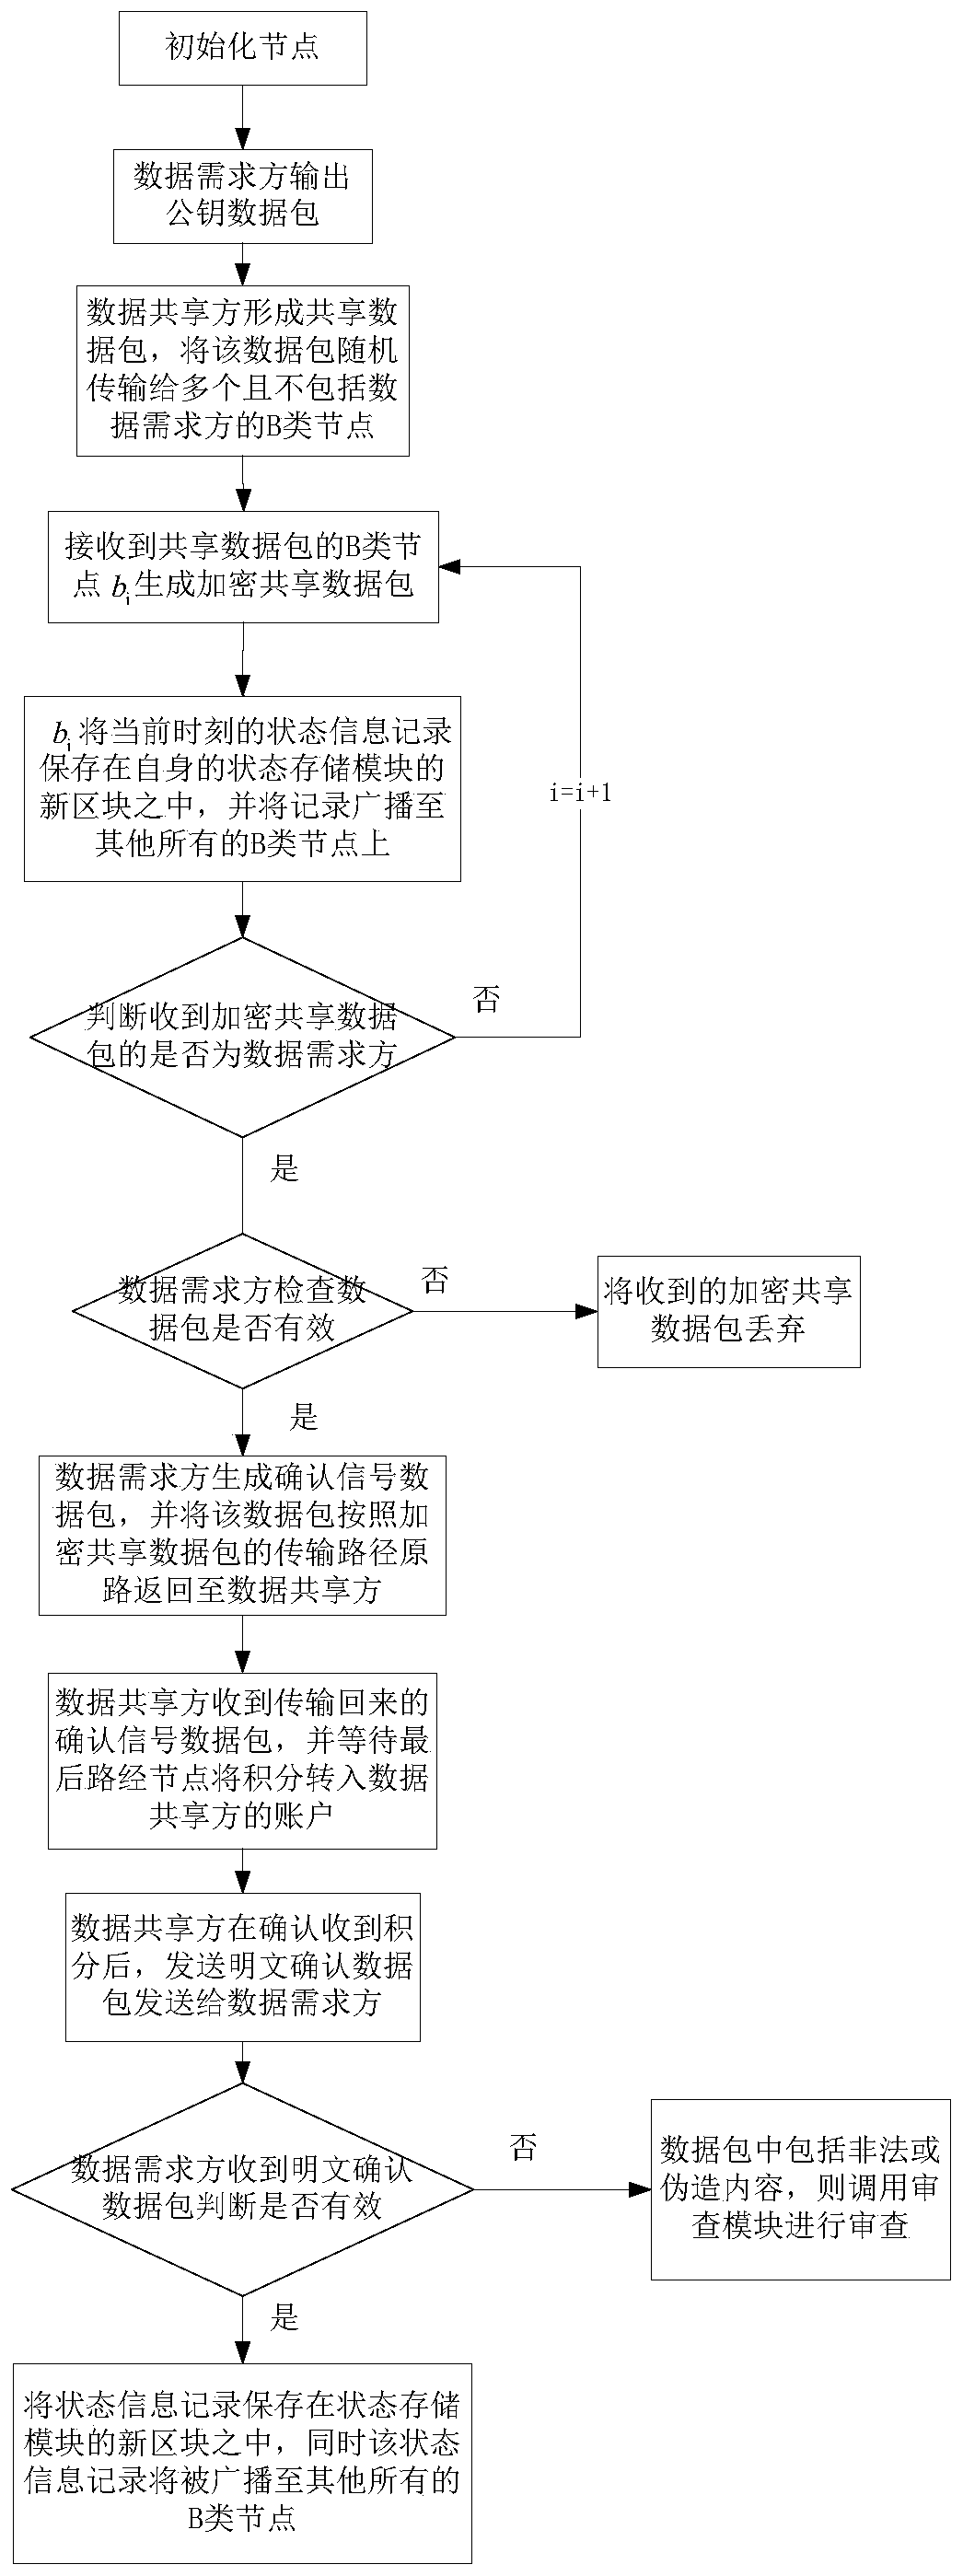 Data anonymity sharing system and method based on block chain